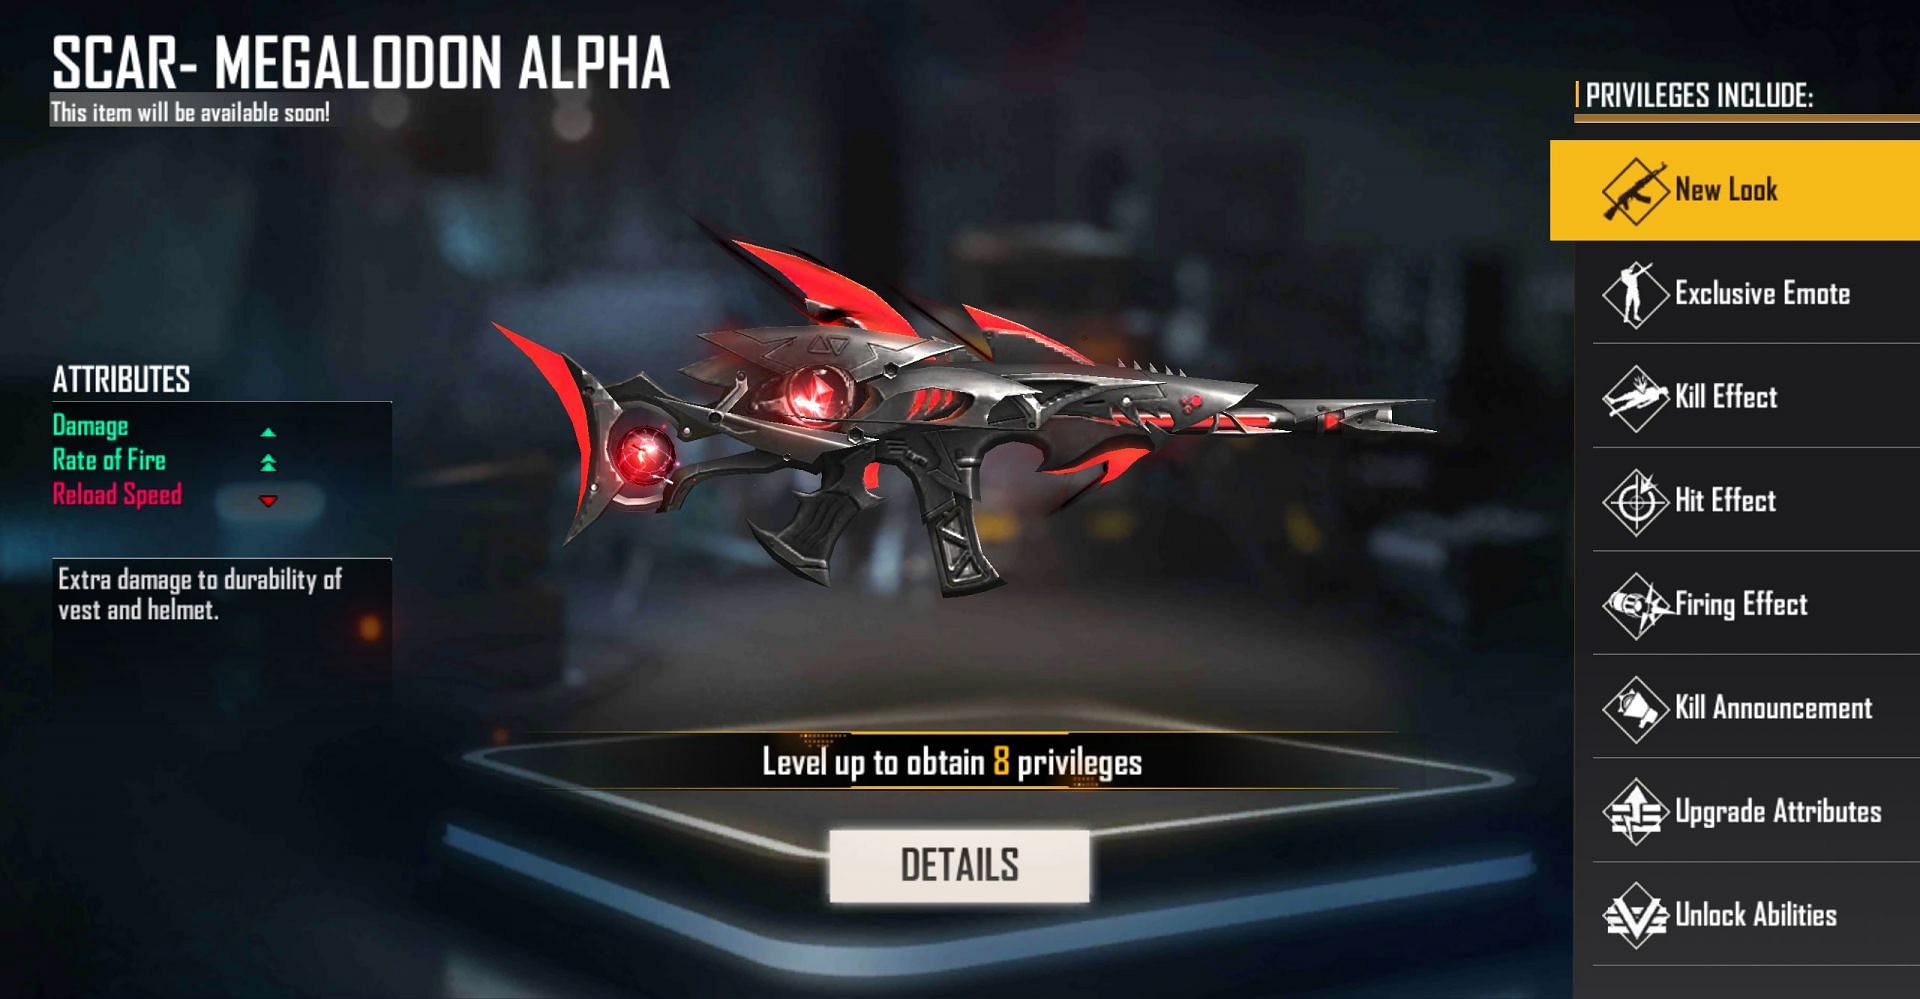 The skin can be obtained from the Faded Wheel (Image via Garena)